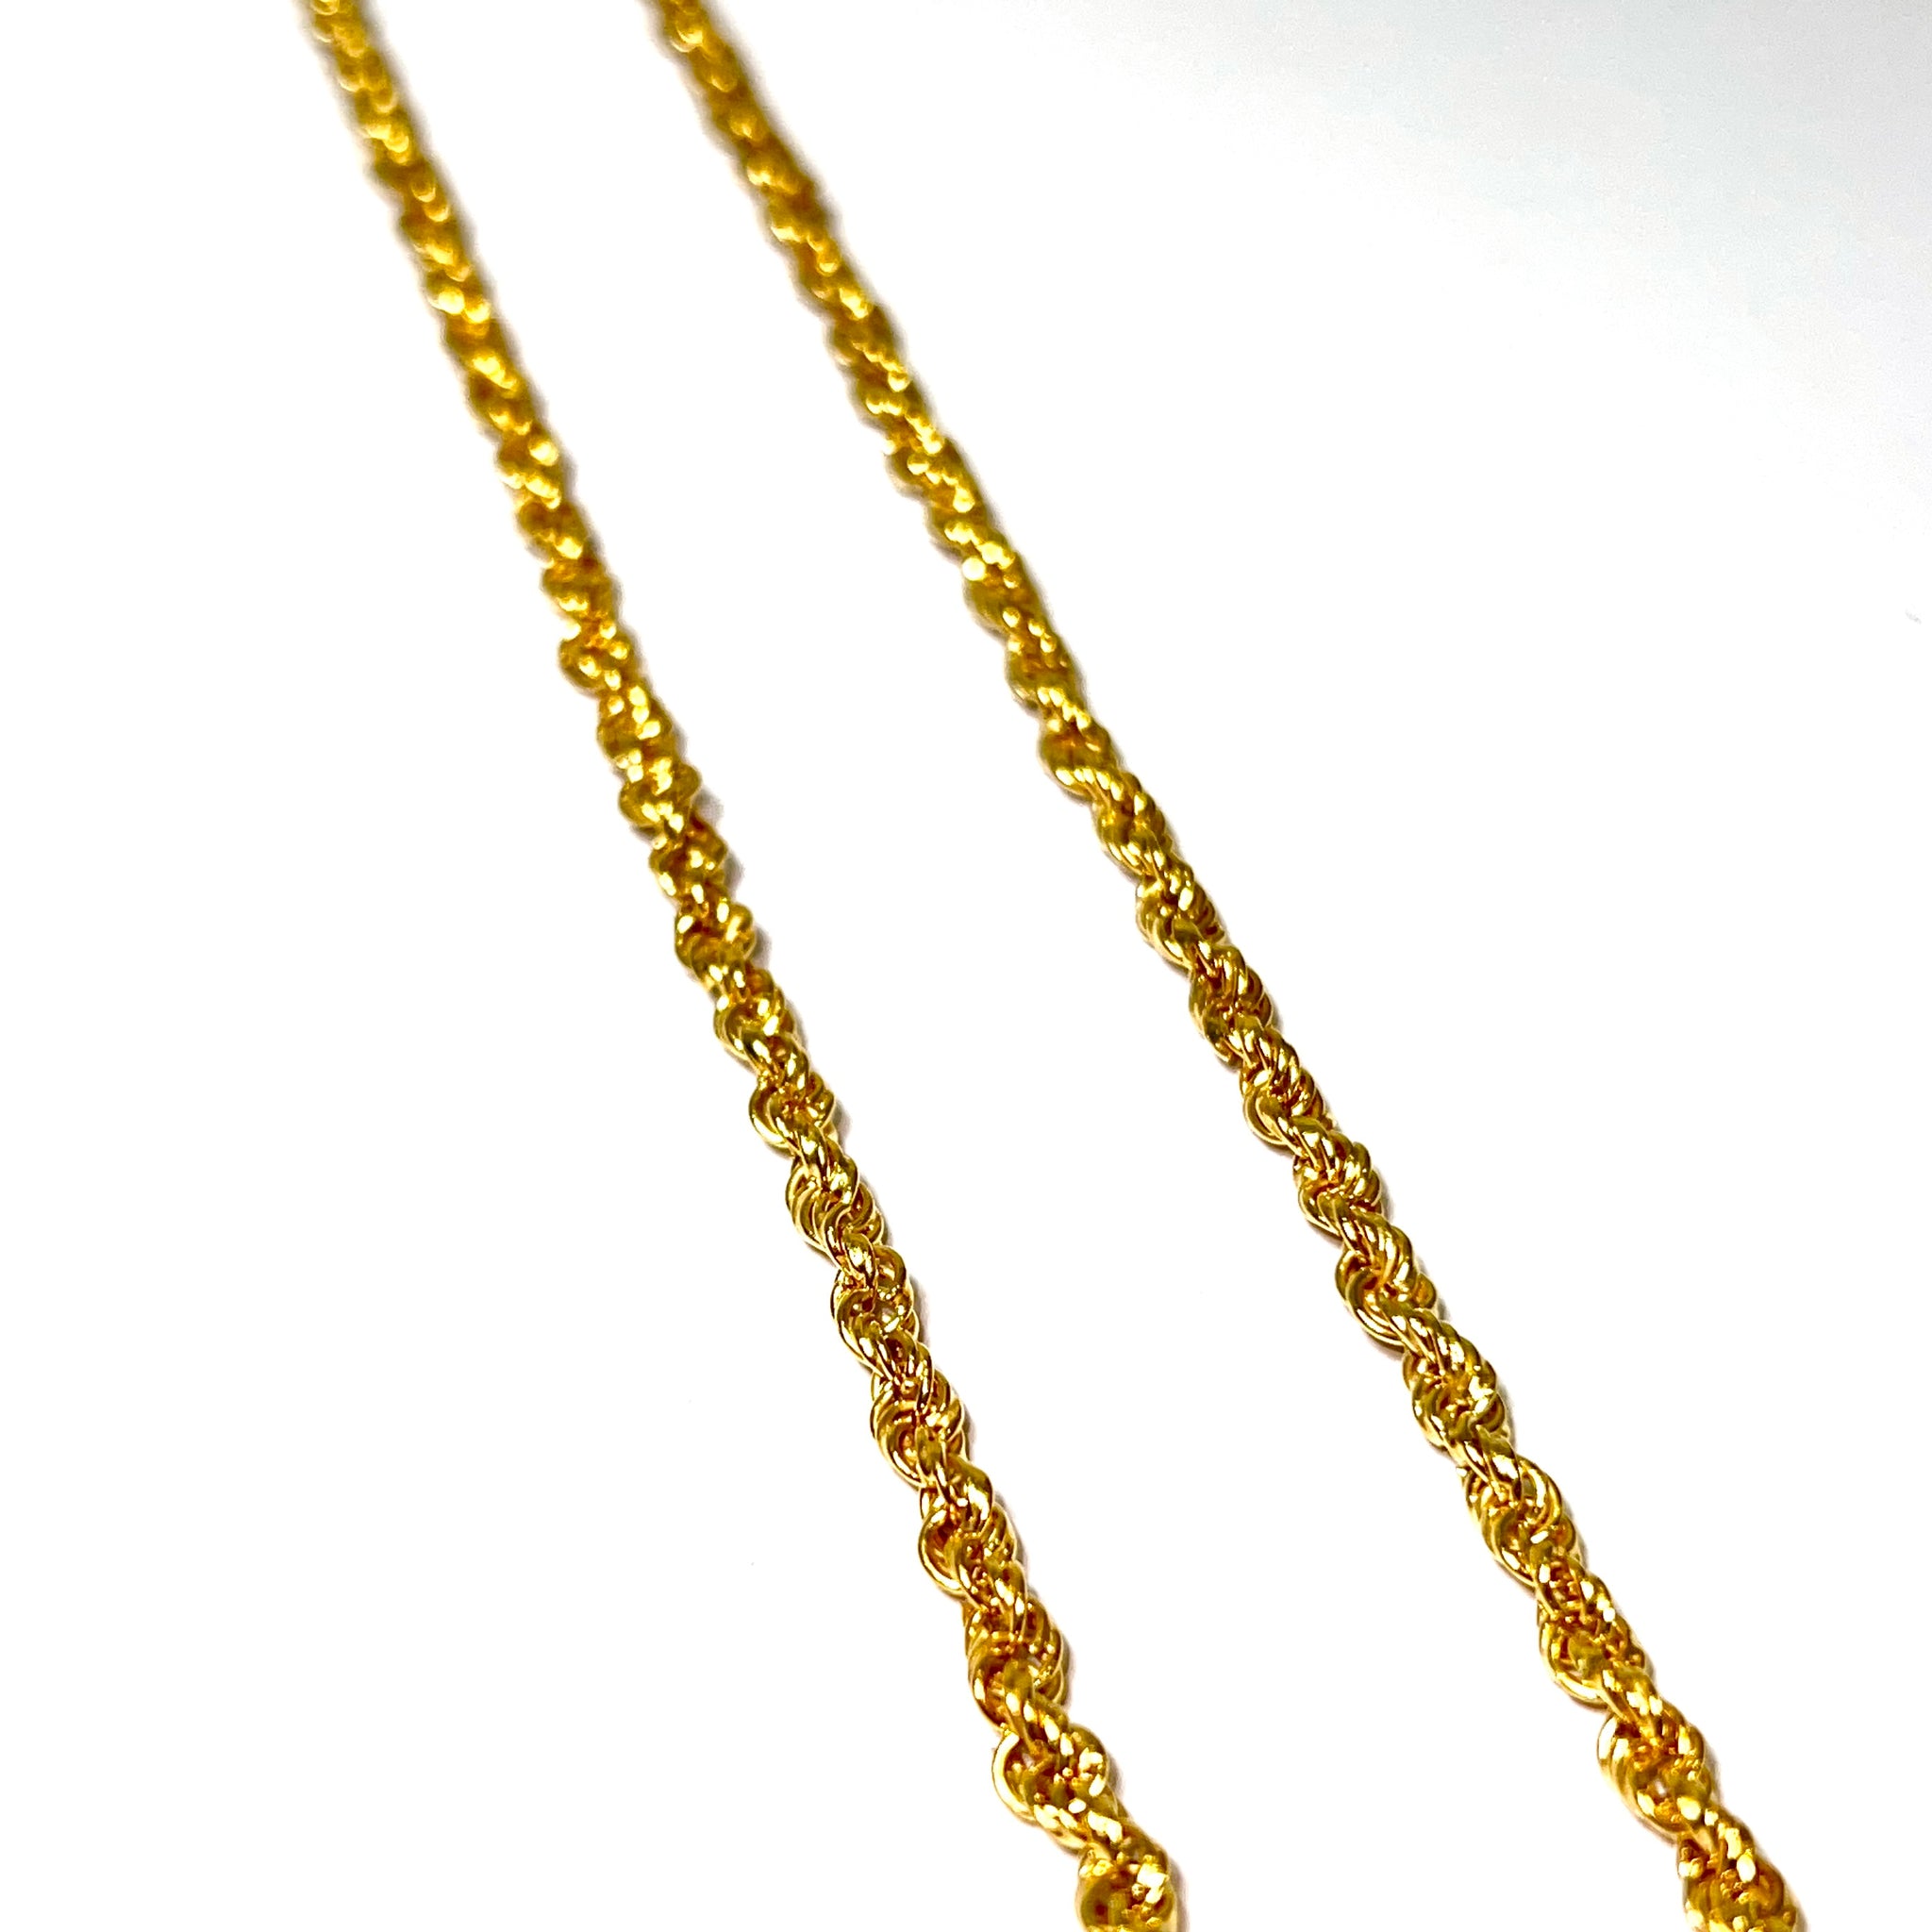 Solid Rope Chain - 14 Carat Gold - 63cm / 4mm - 449